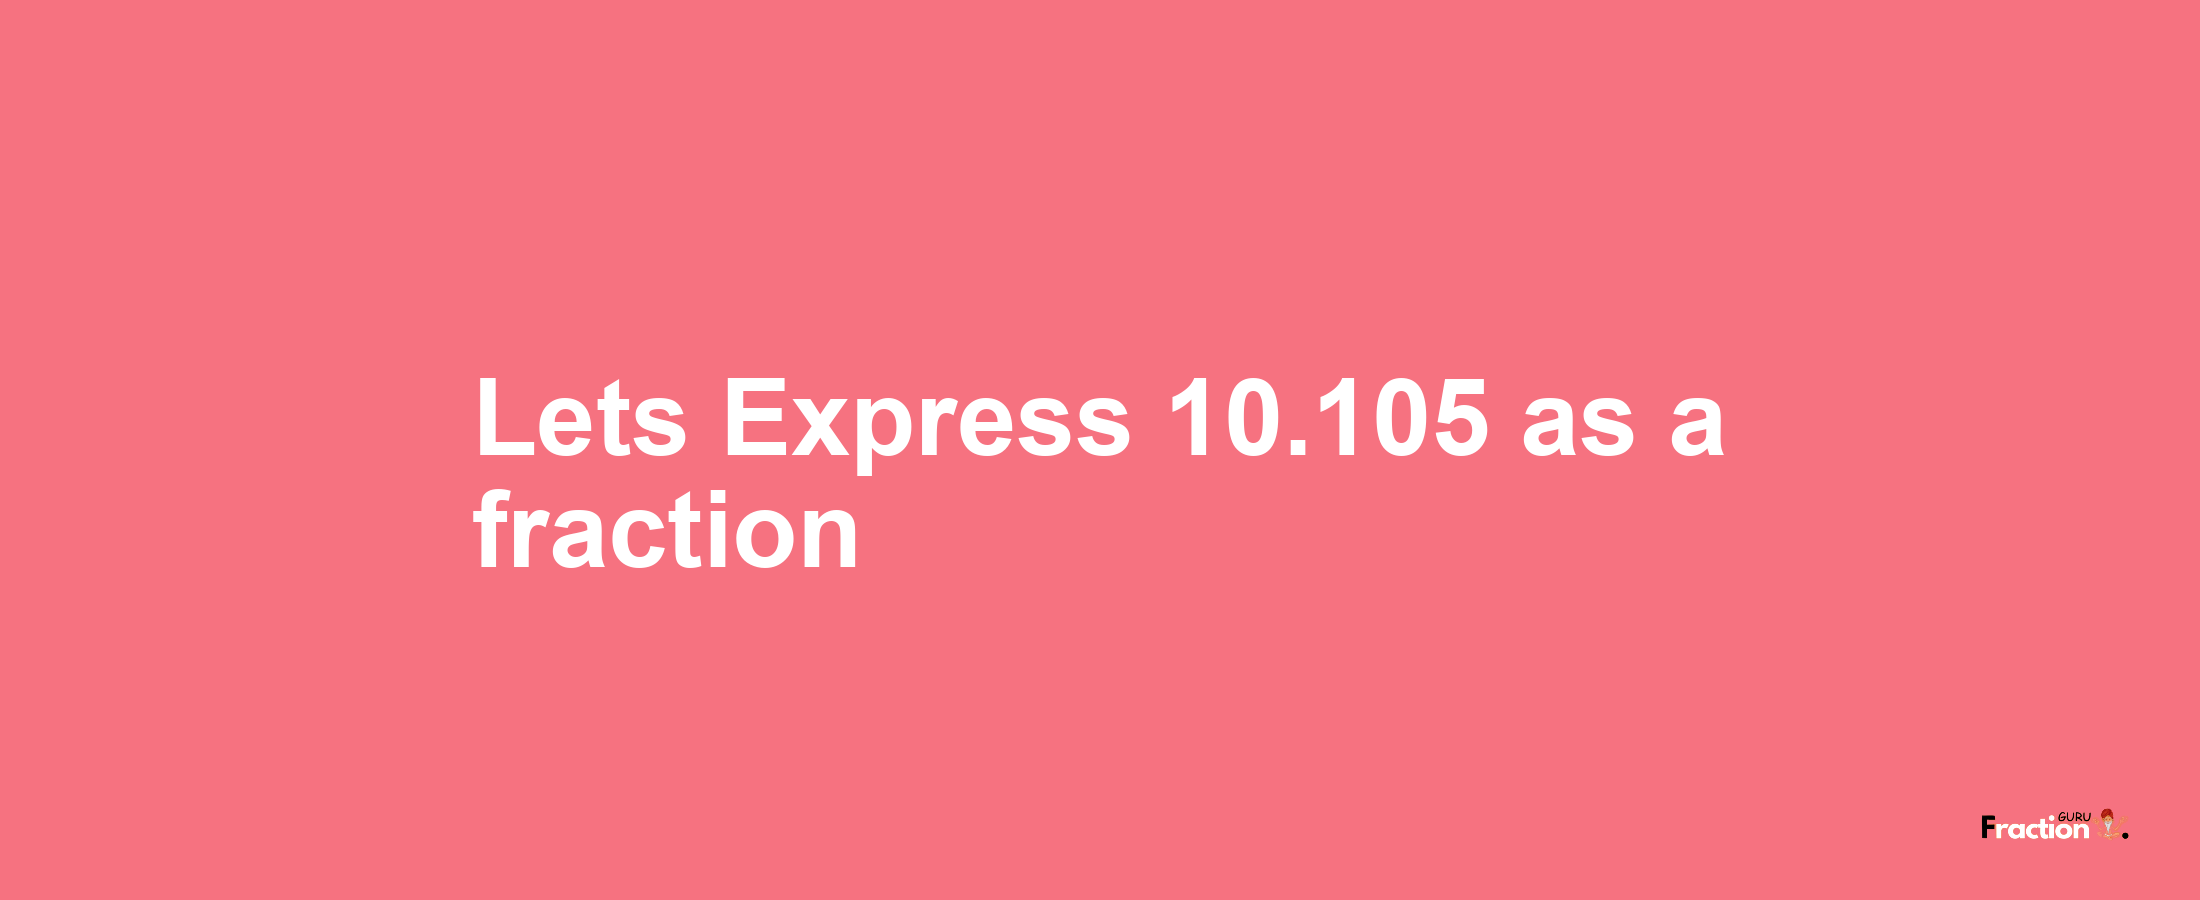 Lets Express 10.105 as afraction